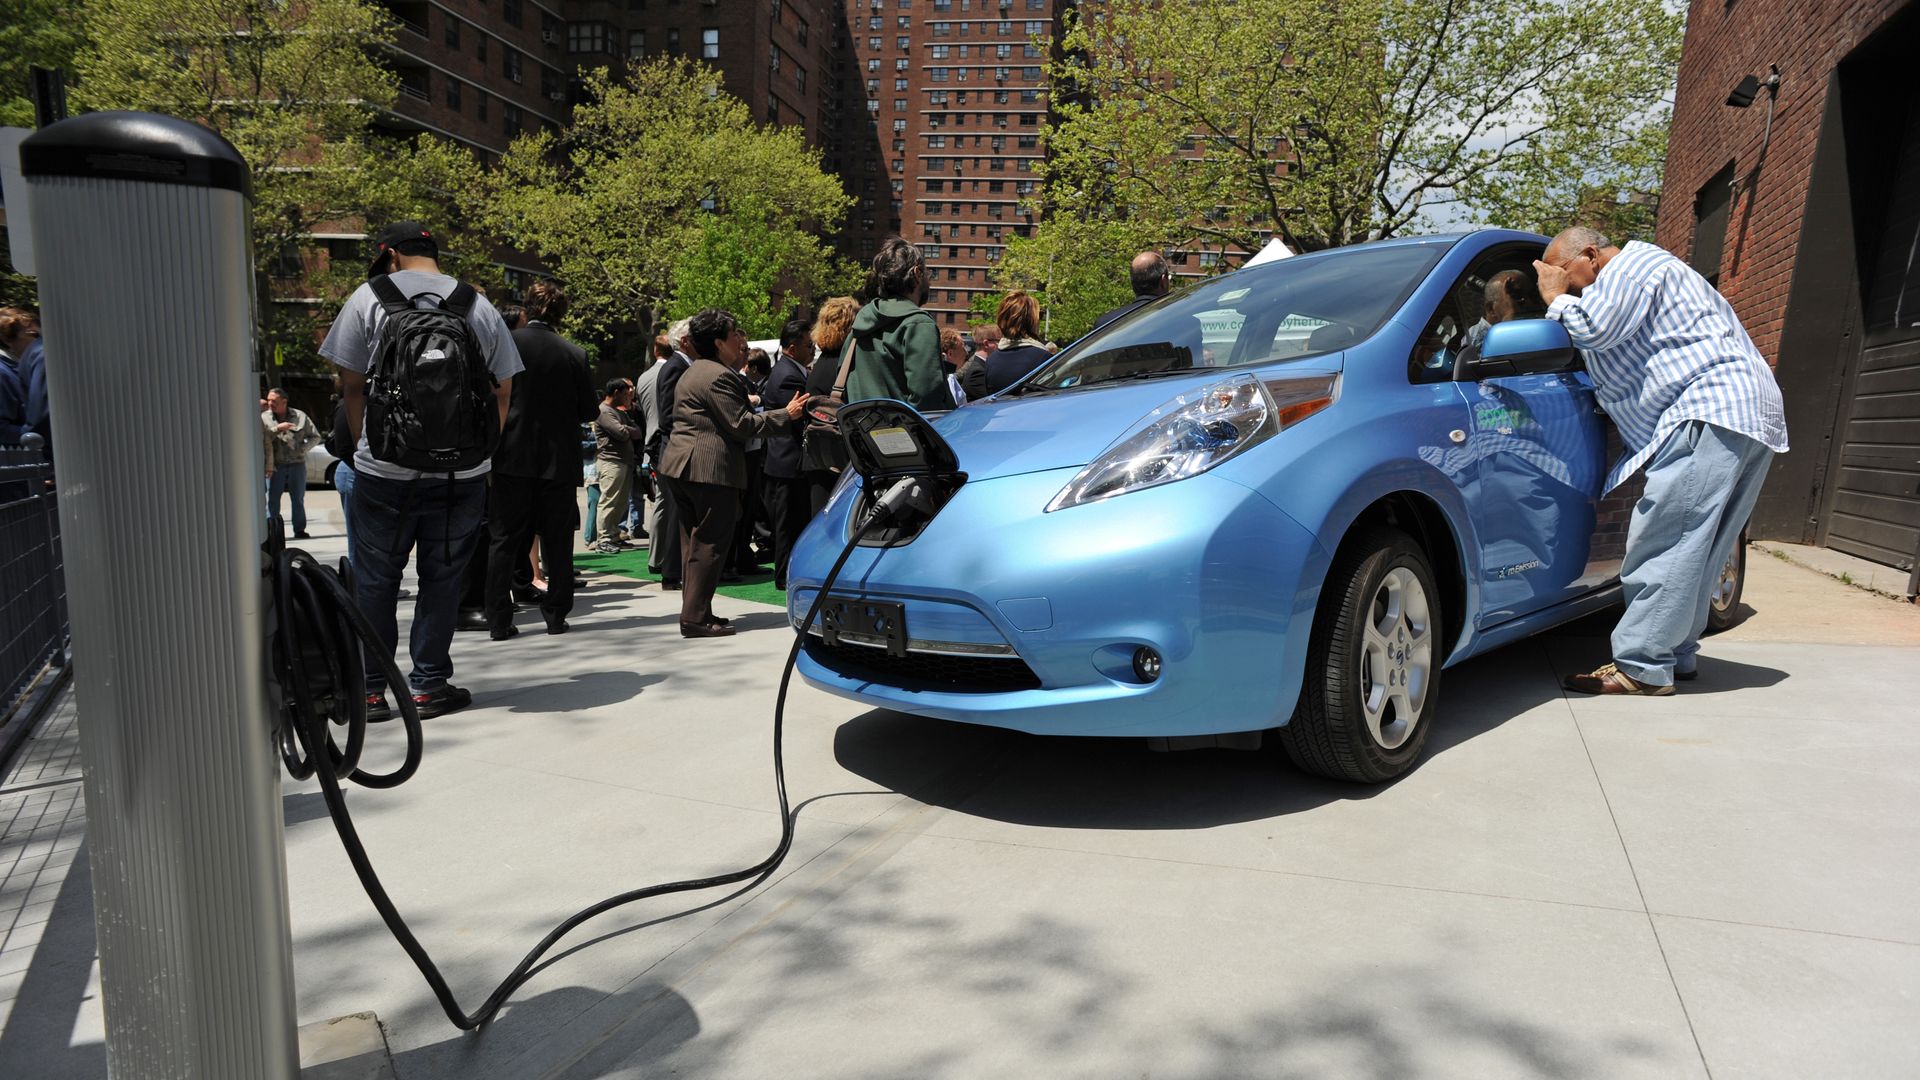  A man looks into a Nissan Leaf electric car t on the Lower East Side of Manhattan May 6, 2011 in New York.